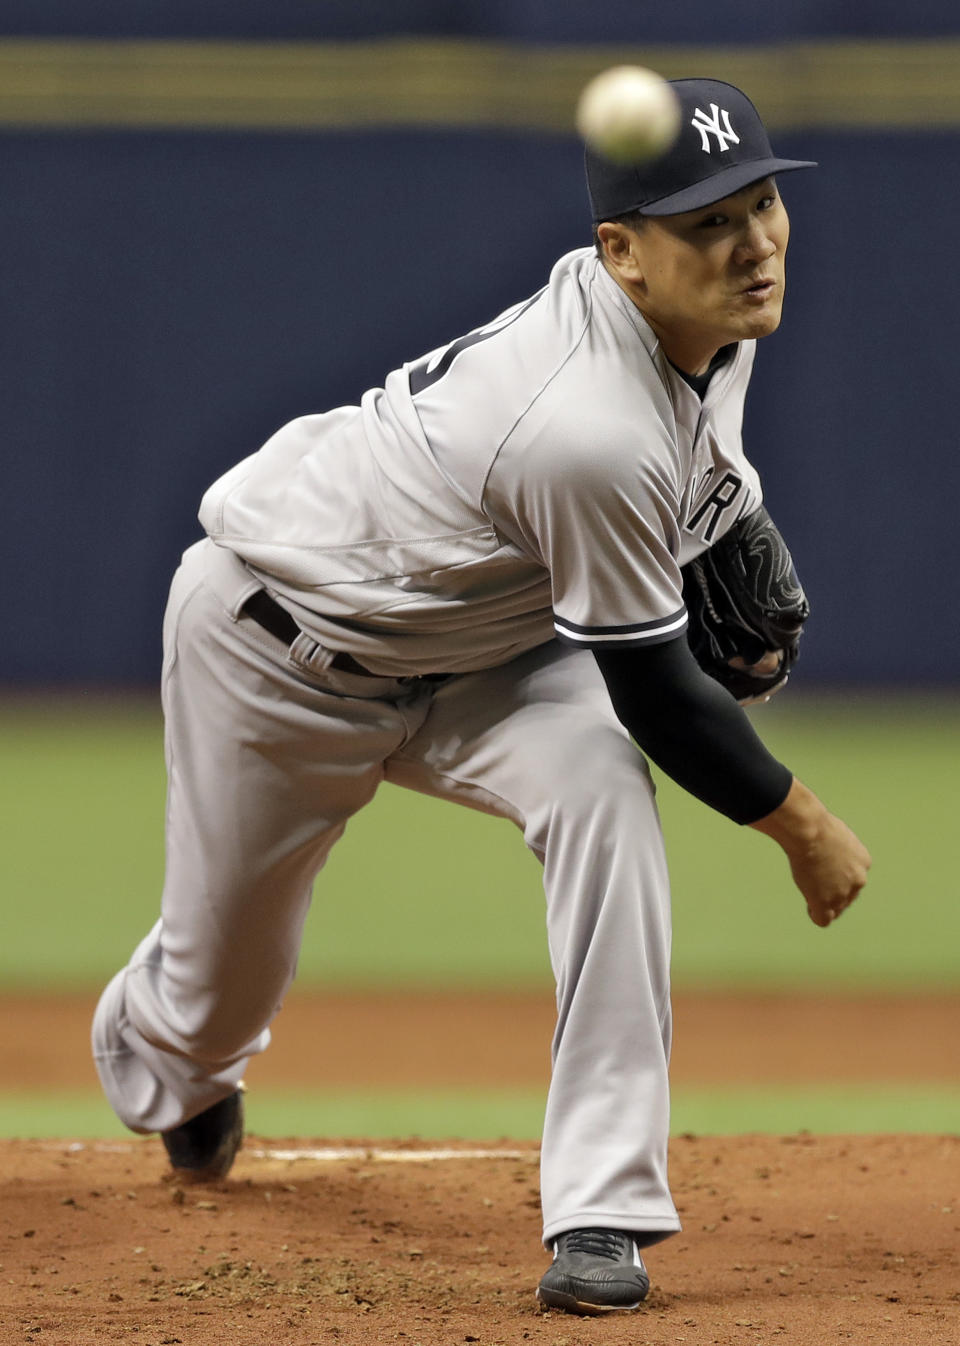 New York Yankees starting pitcher Masahiro Tanaka, of Japan, delivers to the Tampa Bay Rays during the first inning of a baseball game Sunday, April 2, 2017, in St. Petersburg, Fla. (AP Photo/Chris O'Meara)